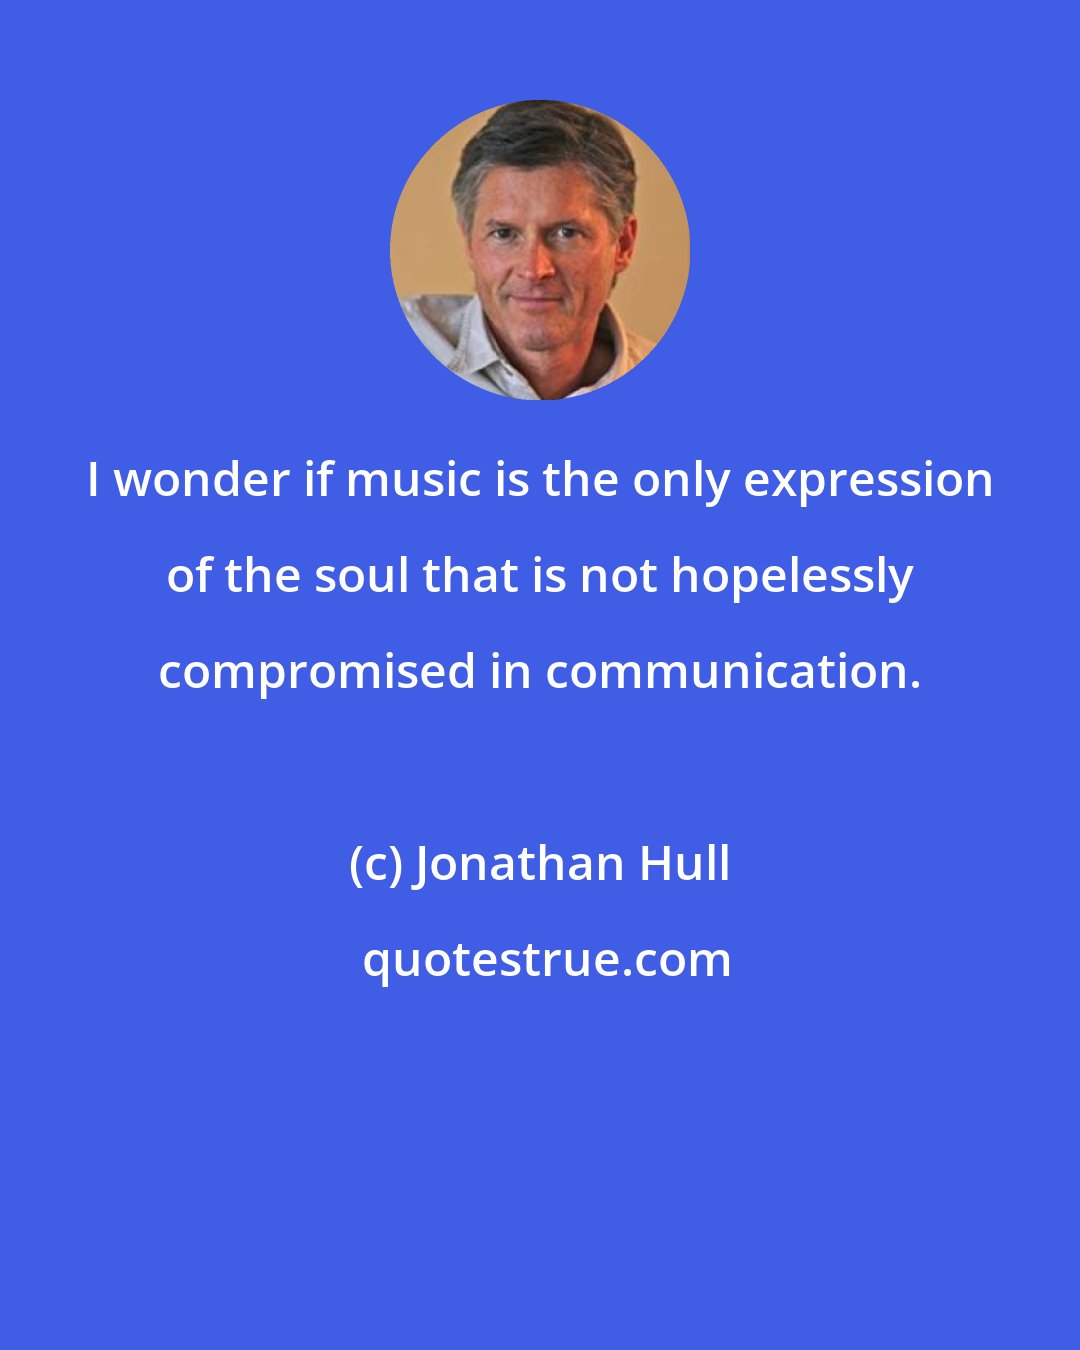 Jonathan Hull: I wonder if music is the only expression of the soul that is not hopelessly compromised in communication.